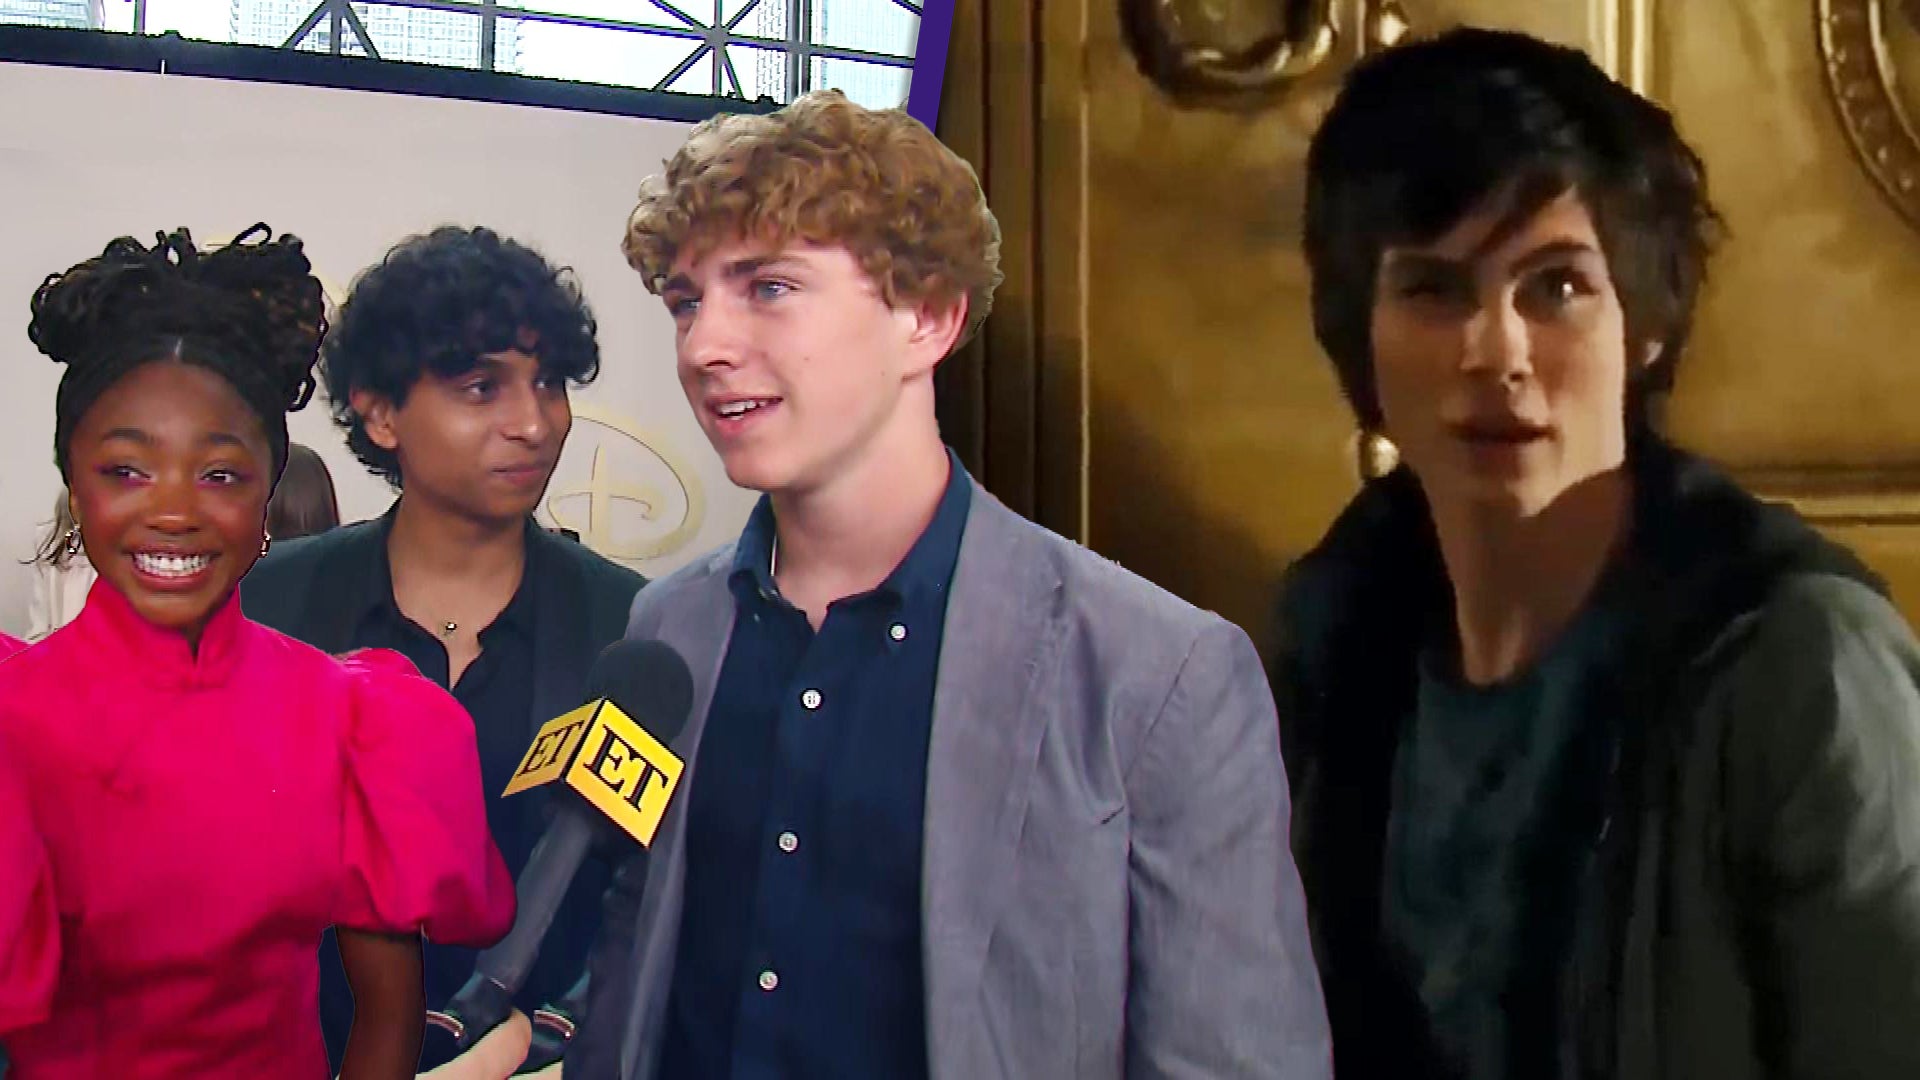 'Percy Jackson' Cast Weighs In on 'Bigger, Darker' Season 2 and a Logan Lerman Cameo (Exclusive)